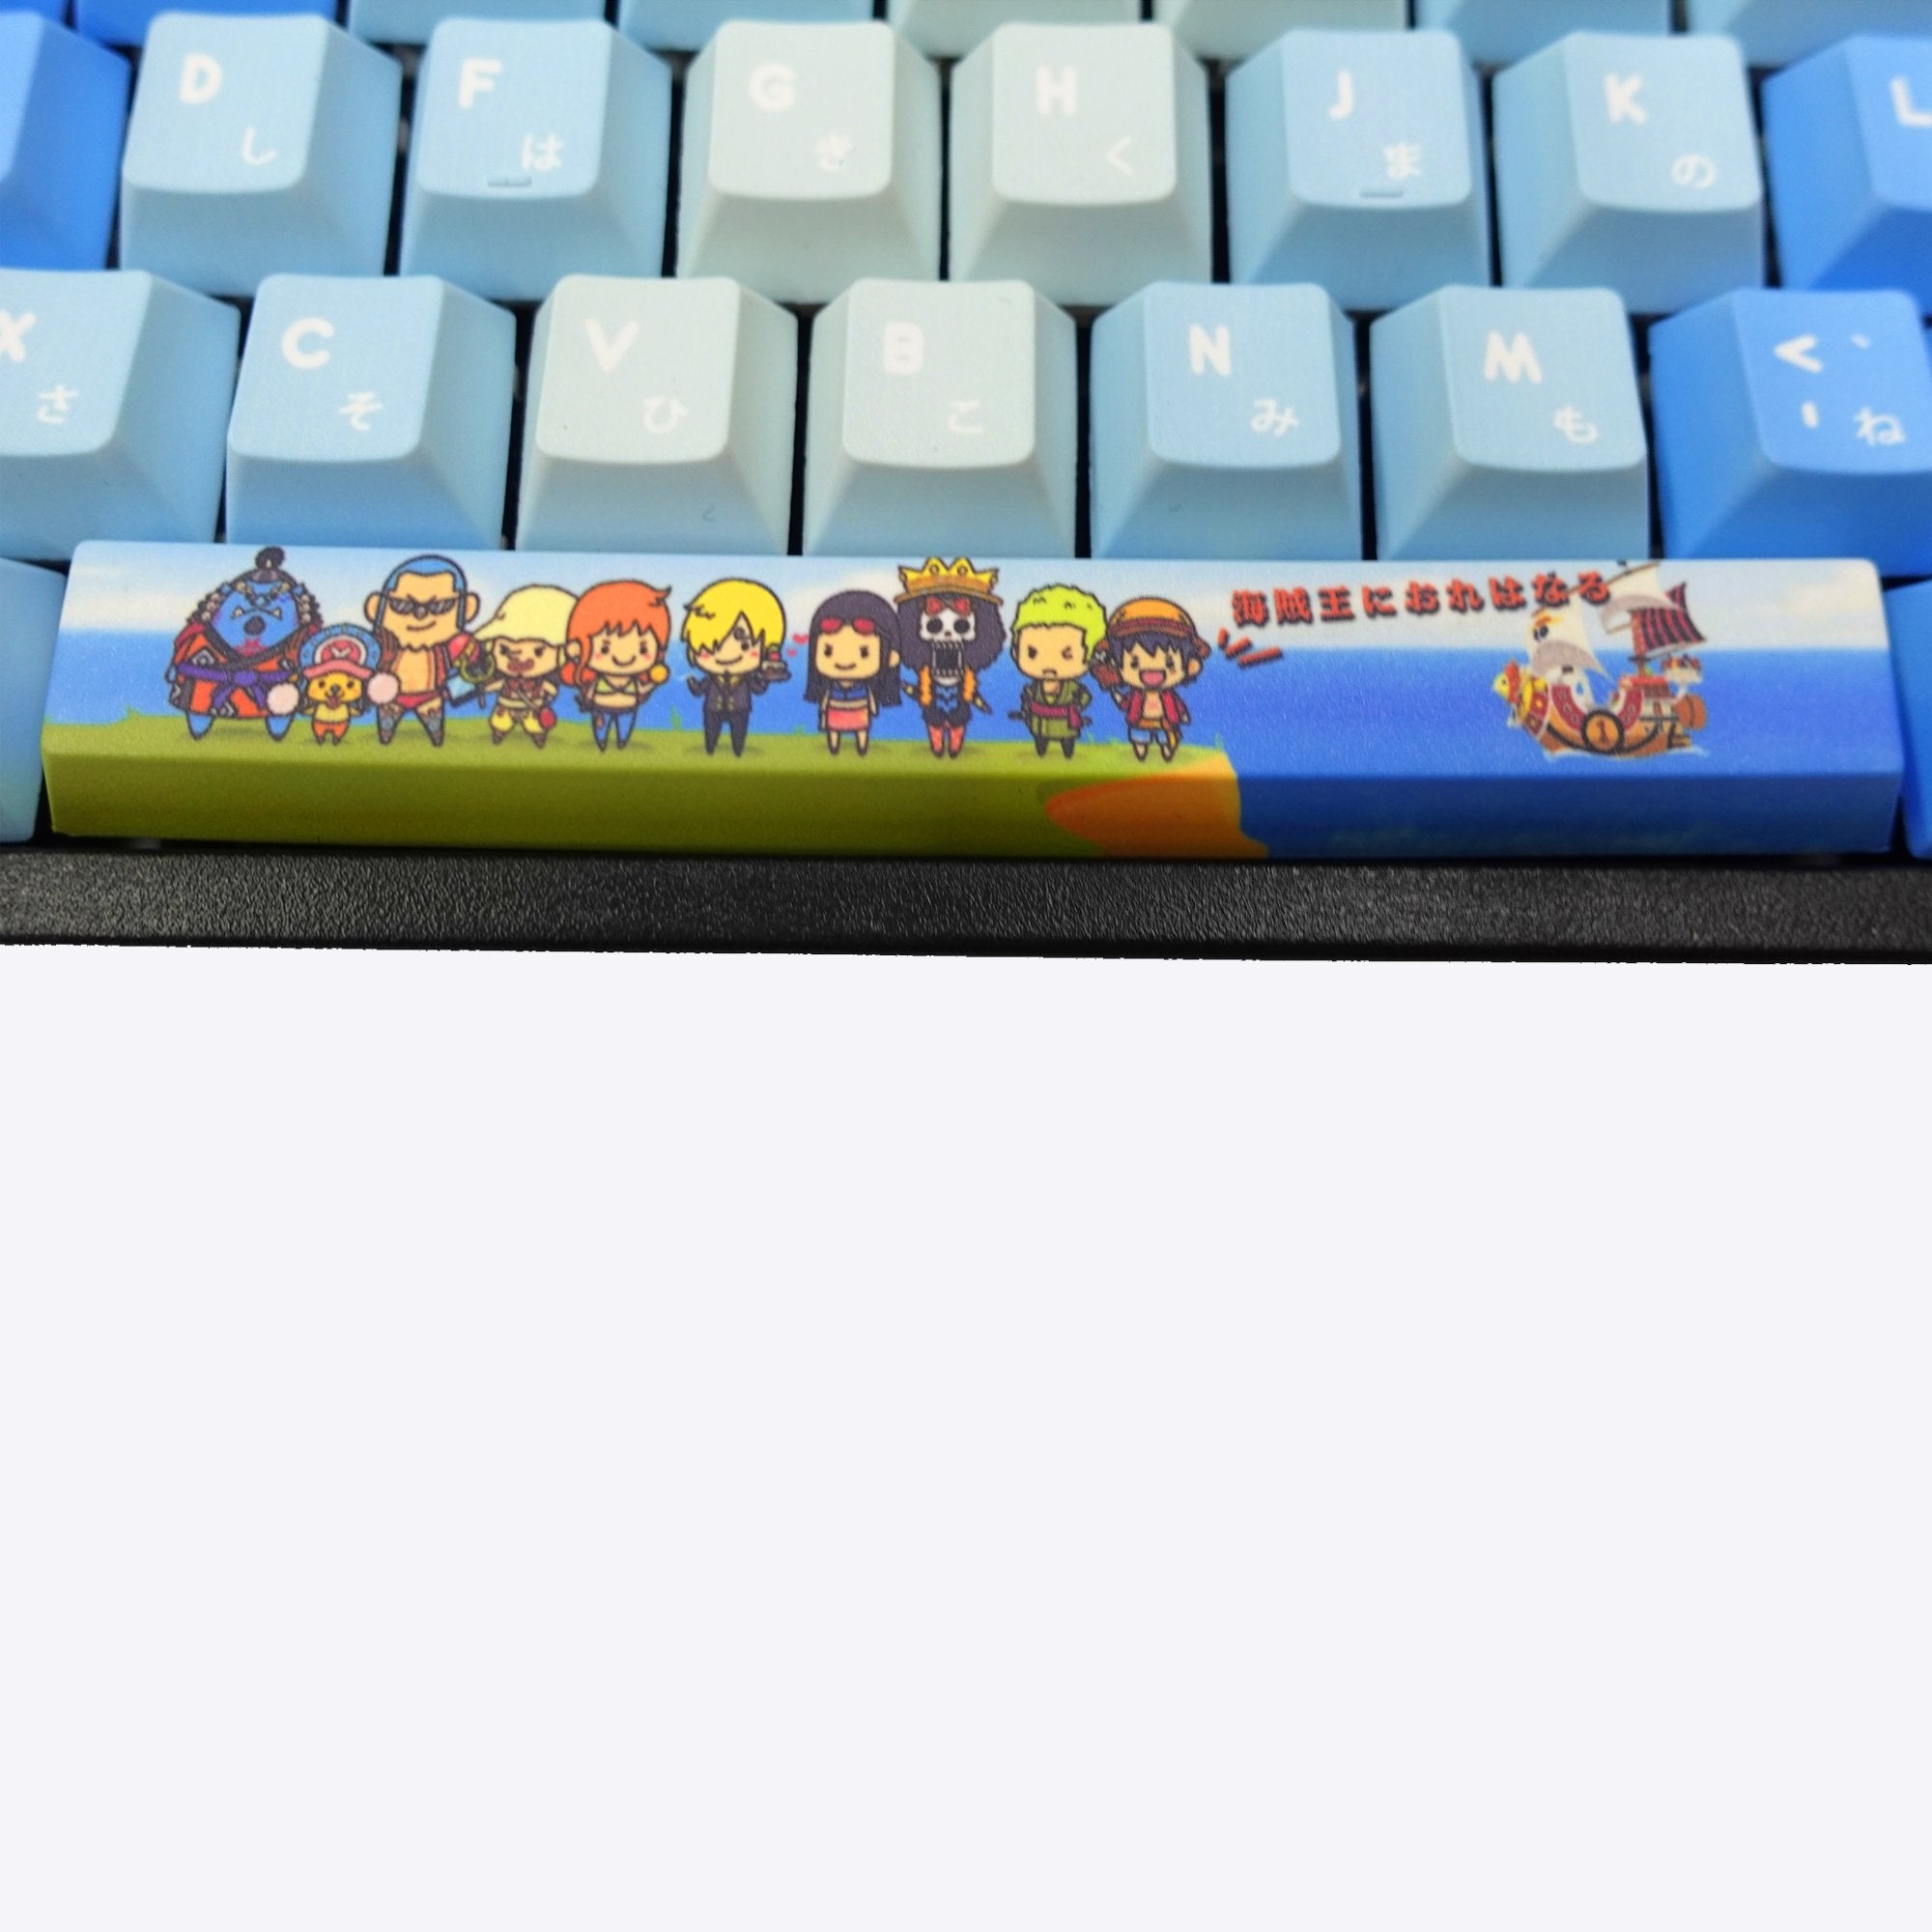 Pin on One piece anime keycaps